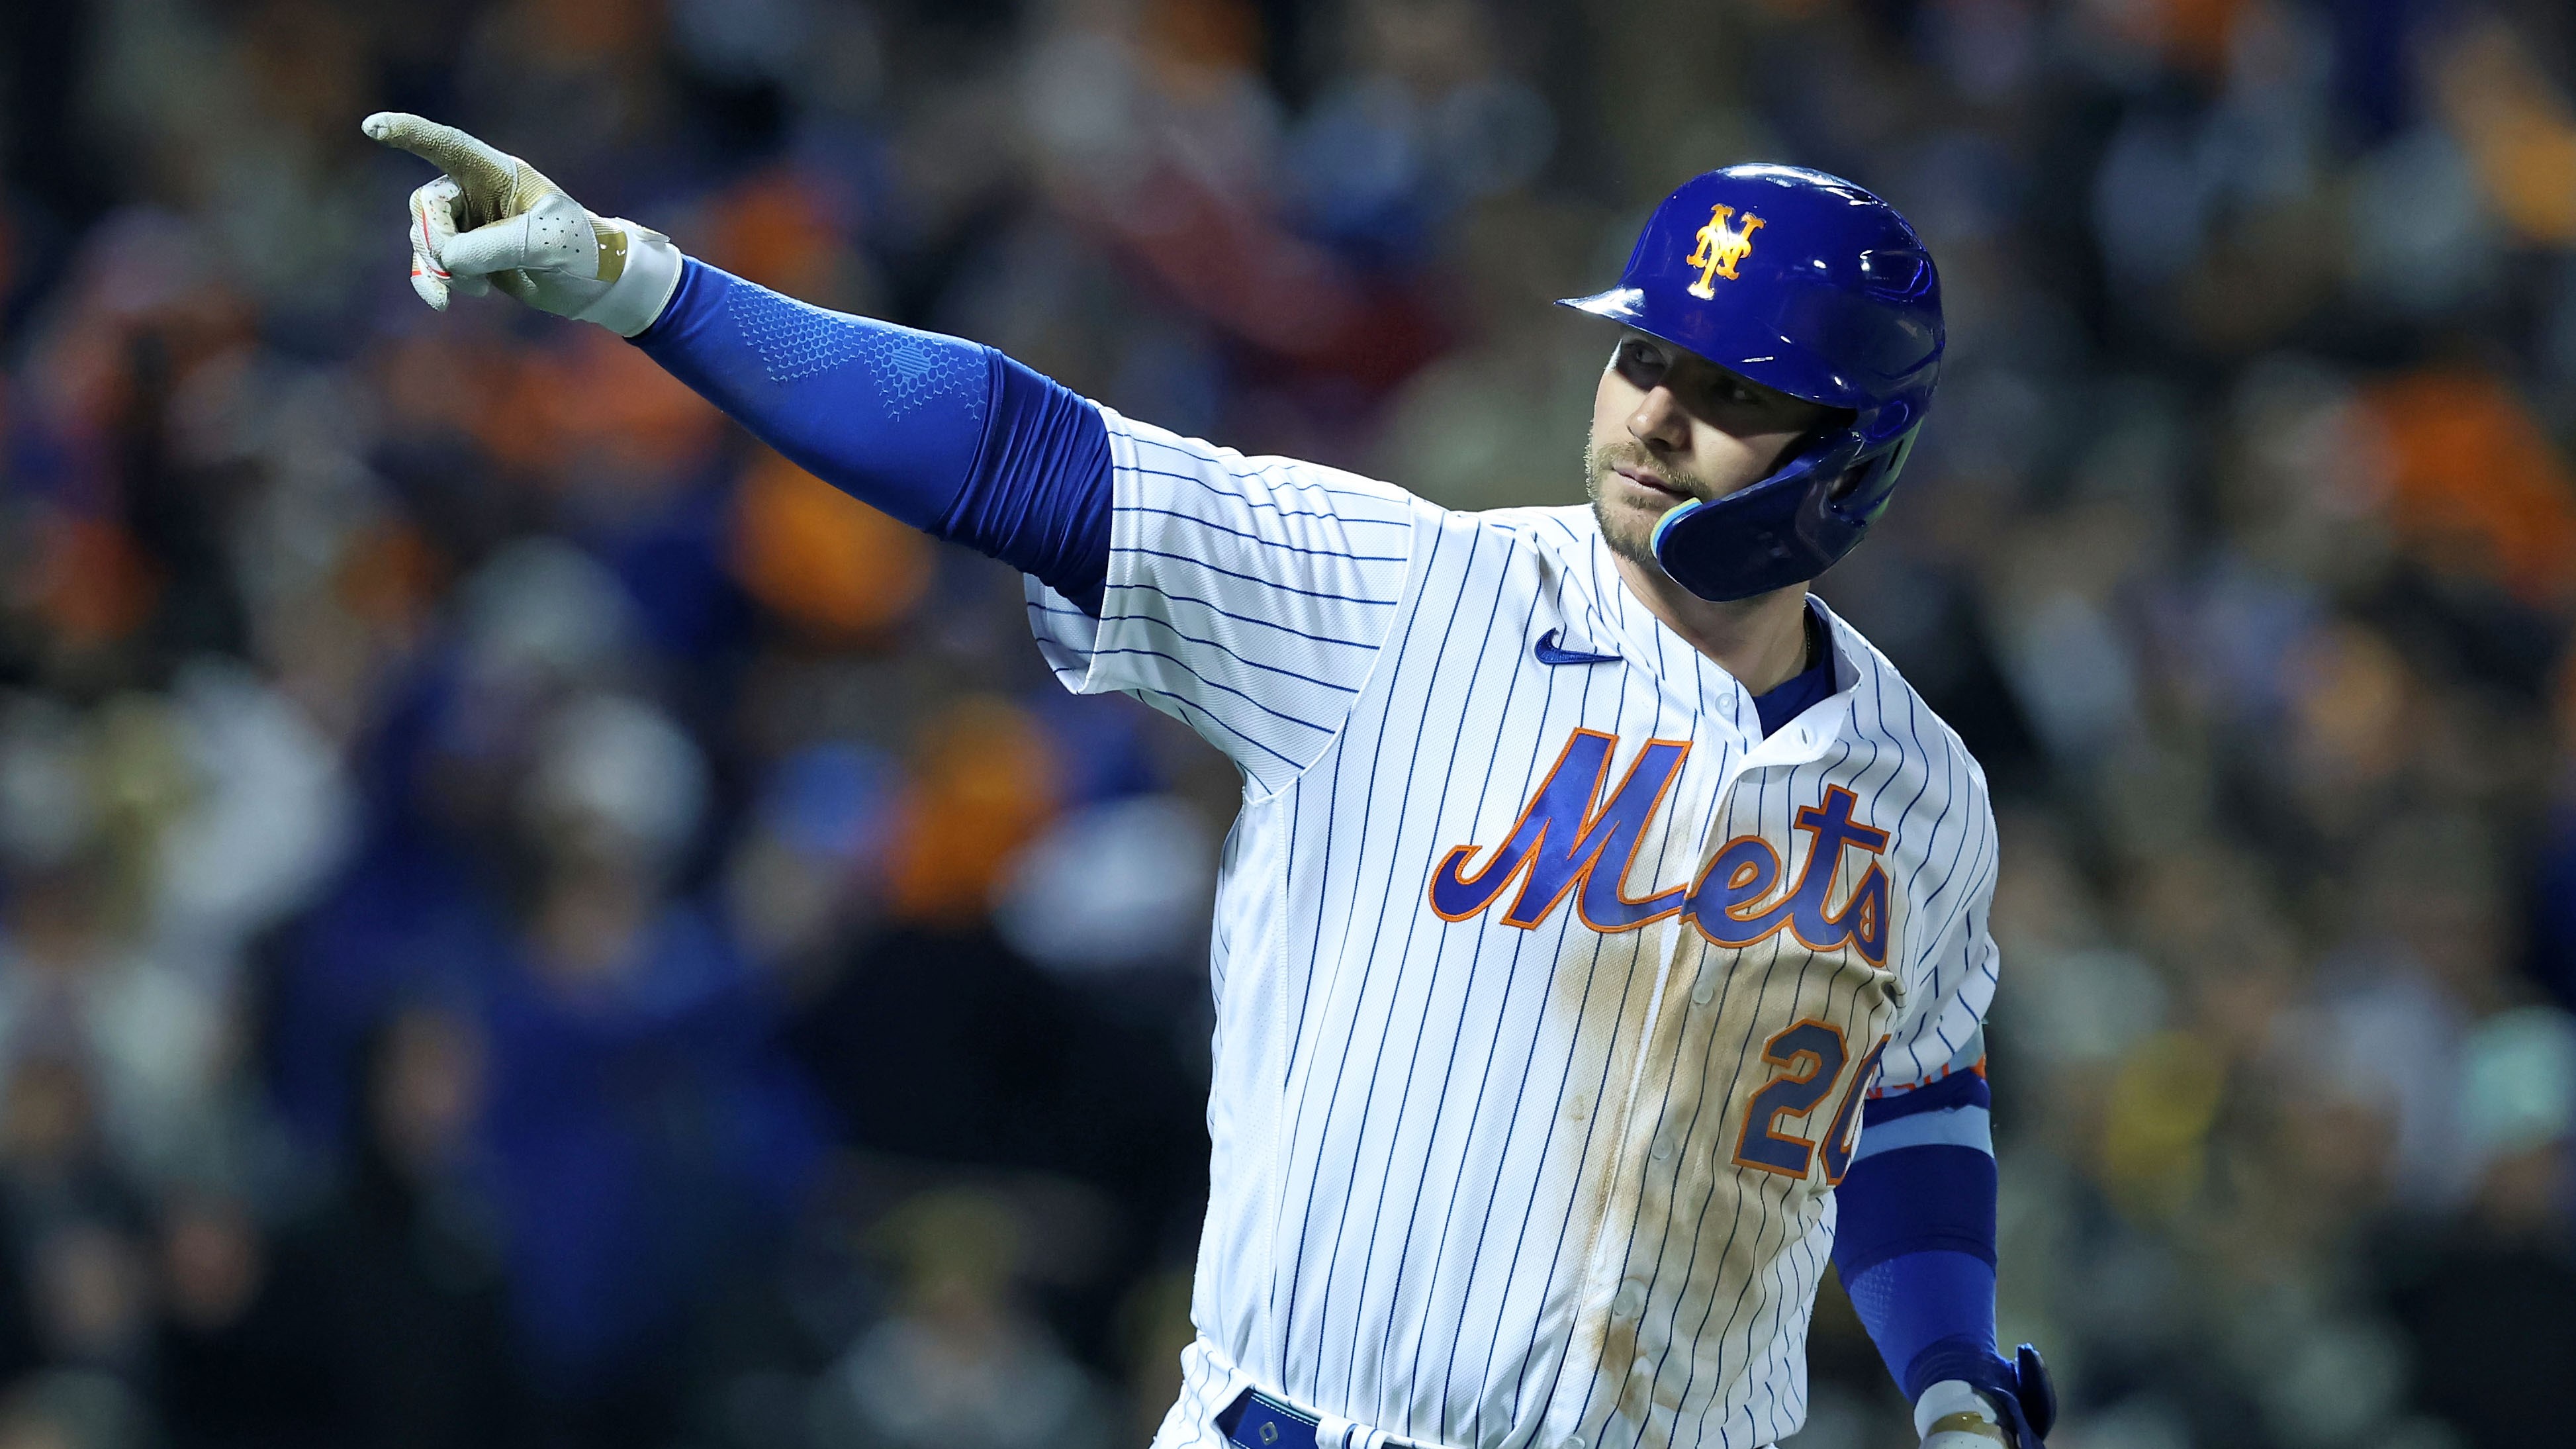 Mets enter 2023 with big goals after spending spree